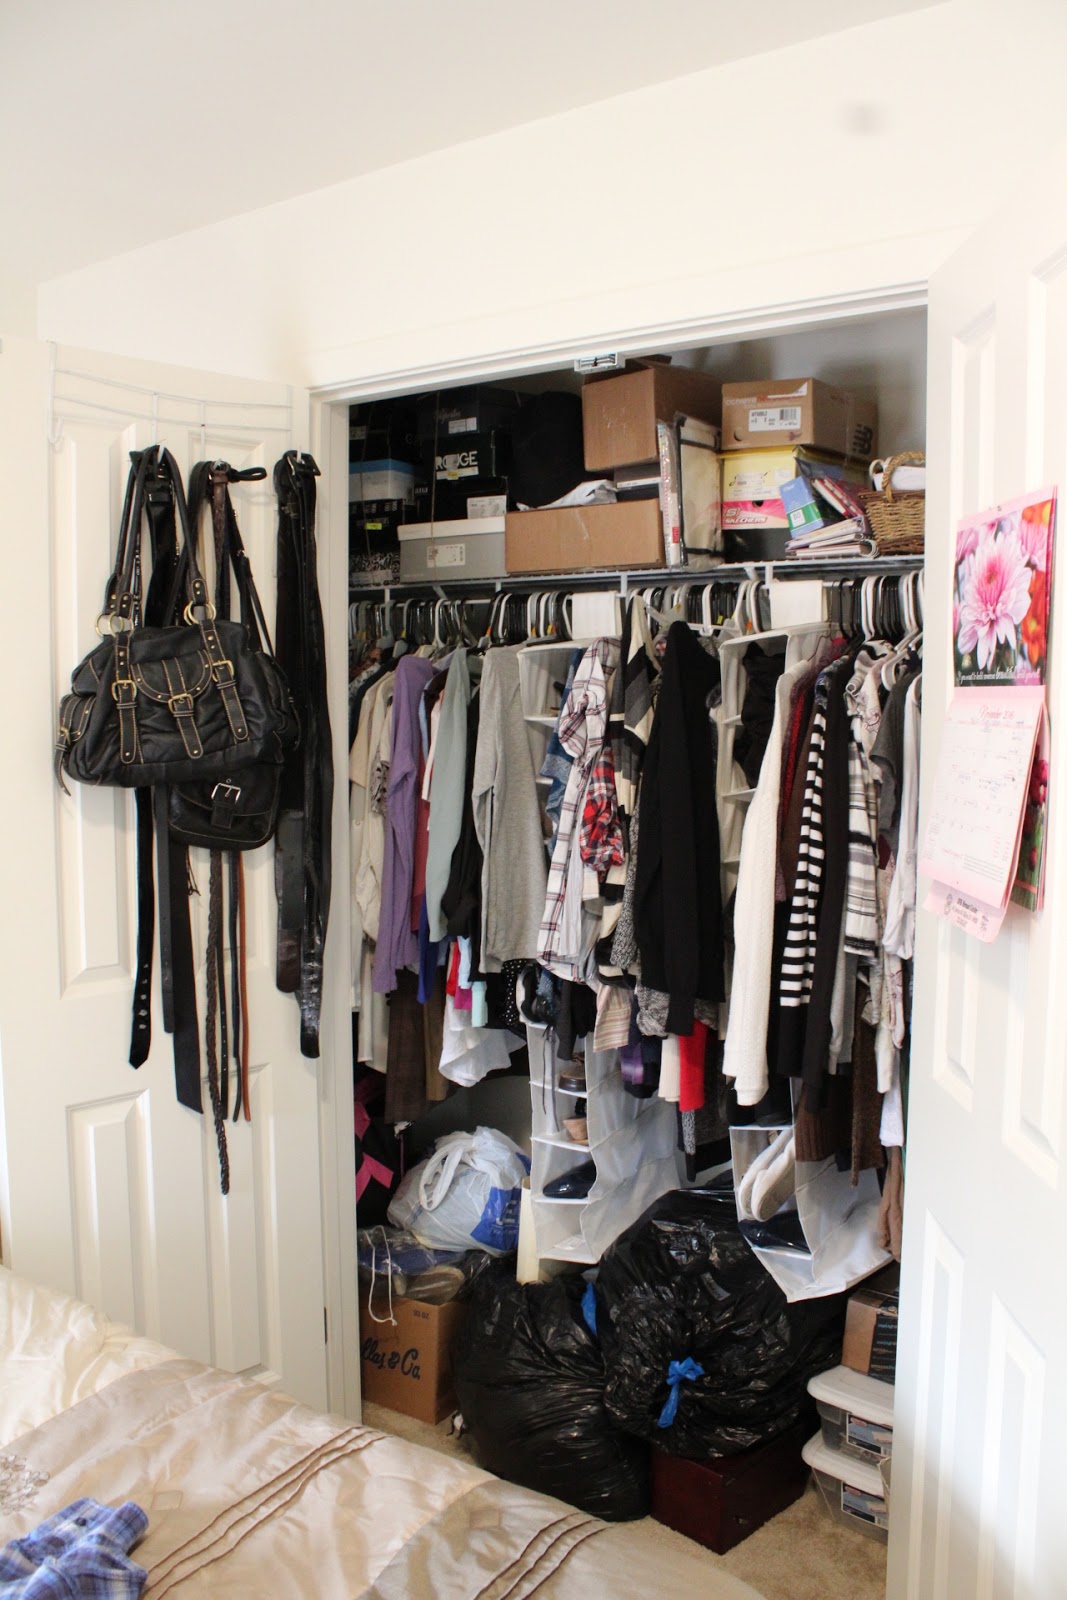 Cosmopolitan Closets Makeover #4 - Be Giving and Give Thanks